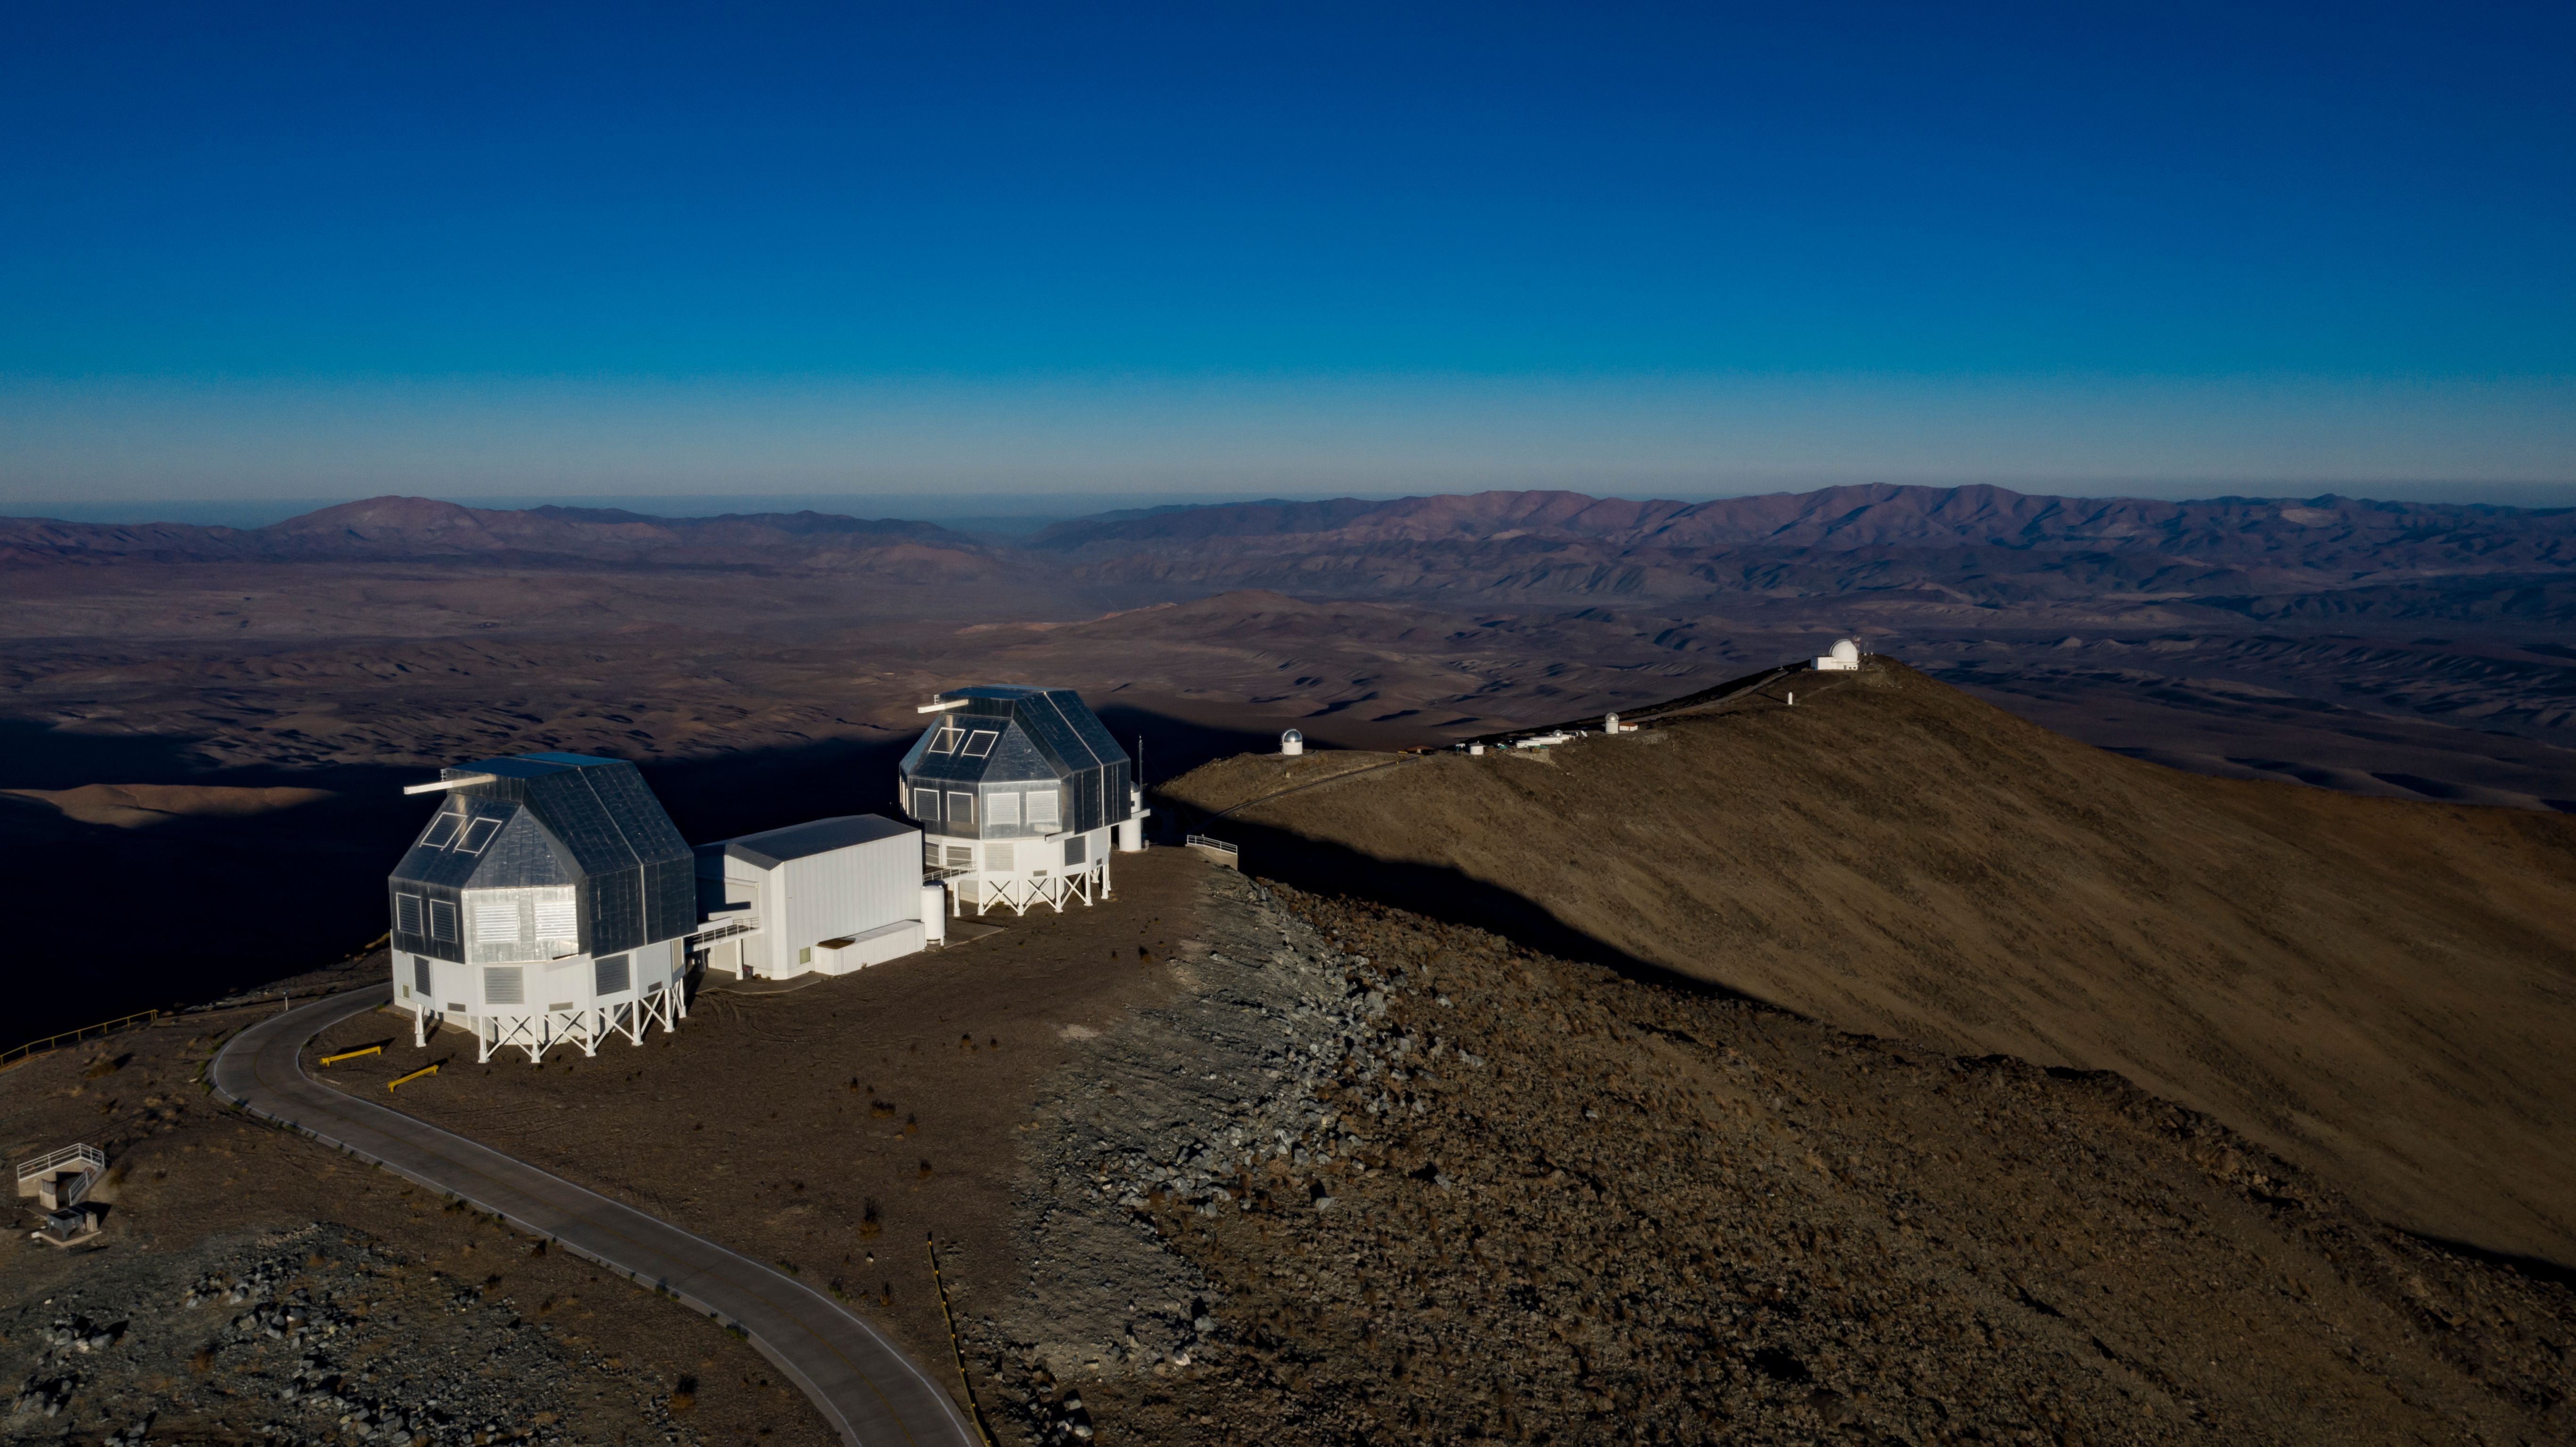 The Las Campanas Observatory, where the Magellan telescope is under construction. (Photo: Martin BERNETTI / AFP, Getty Images)